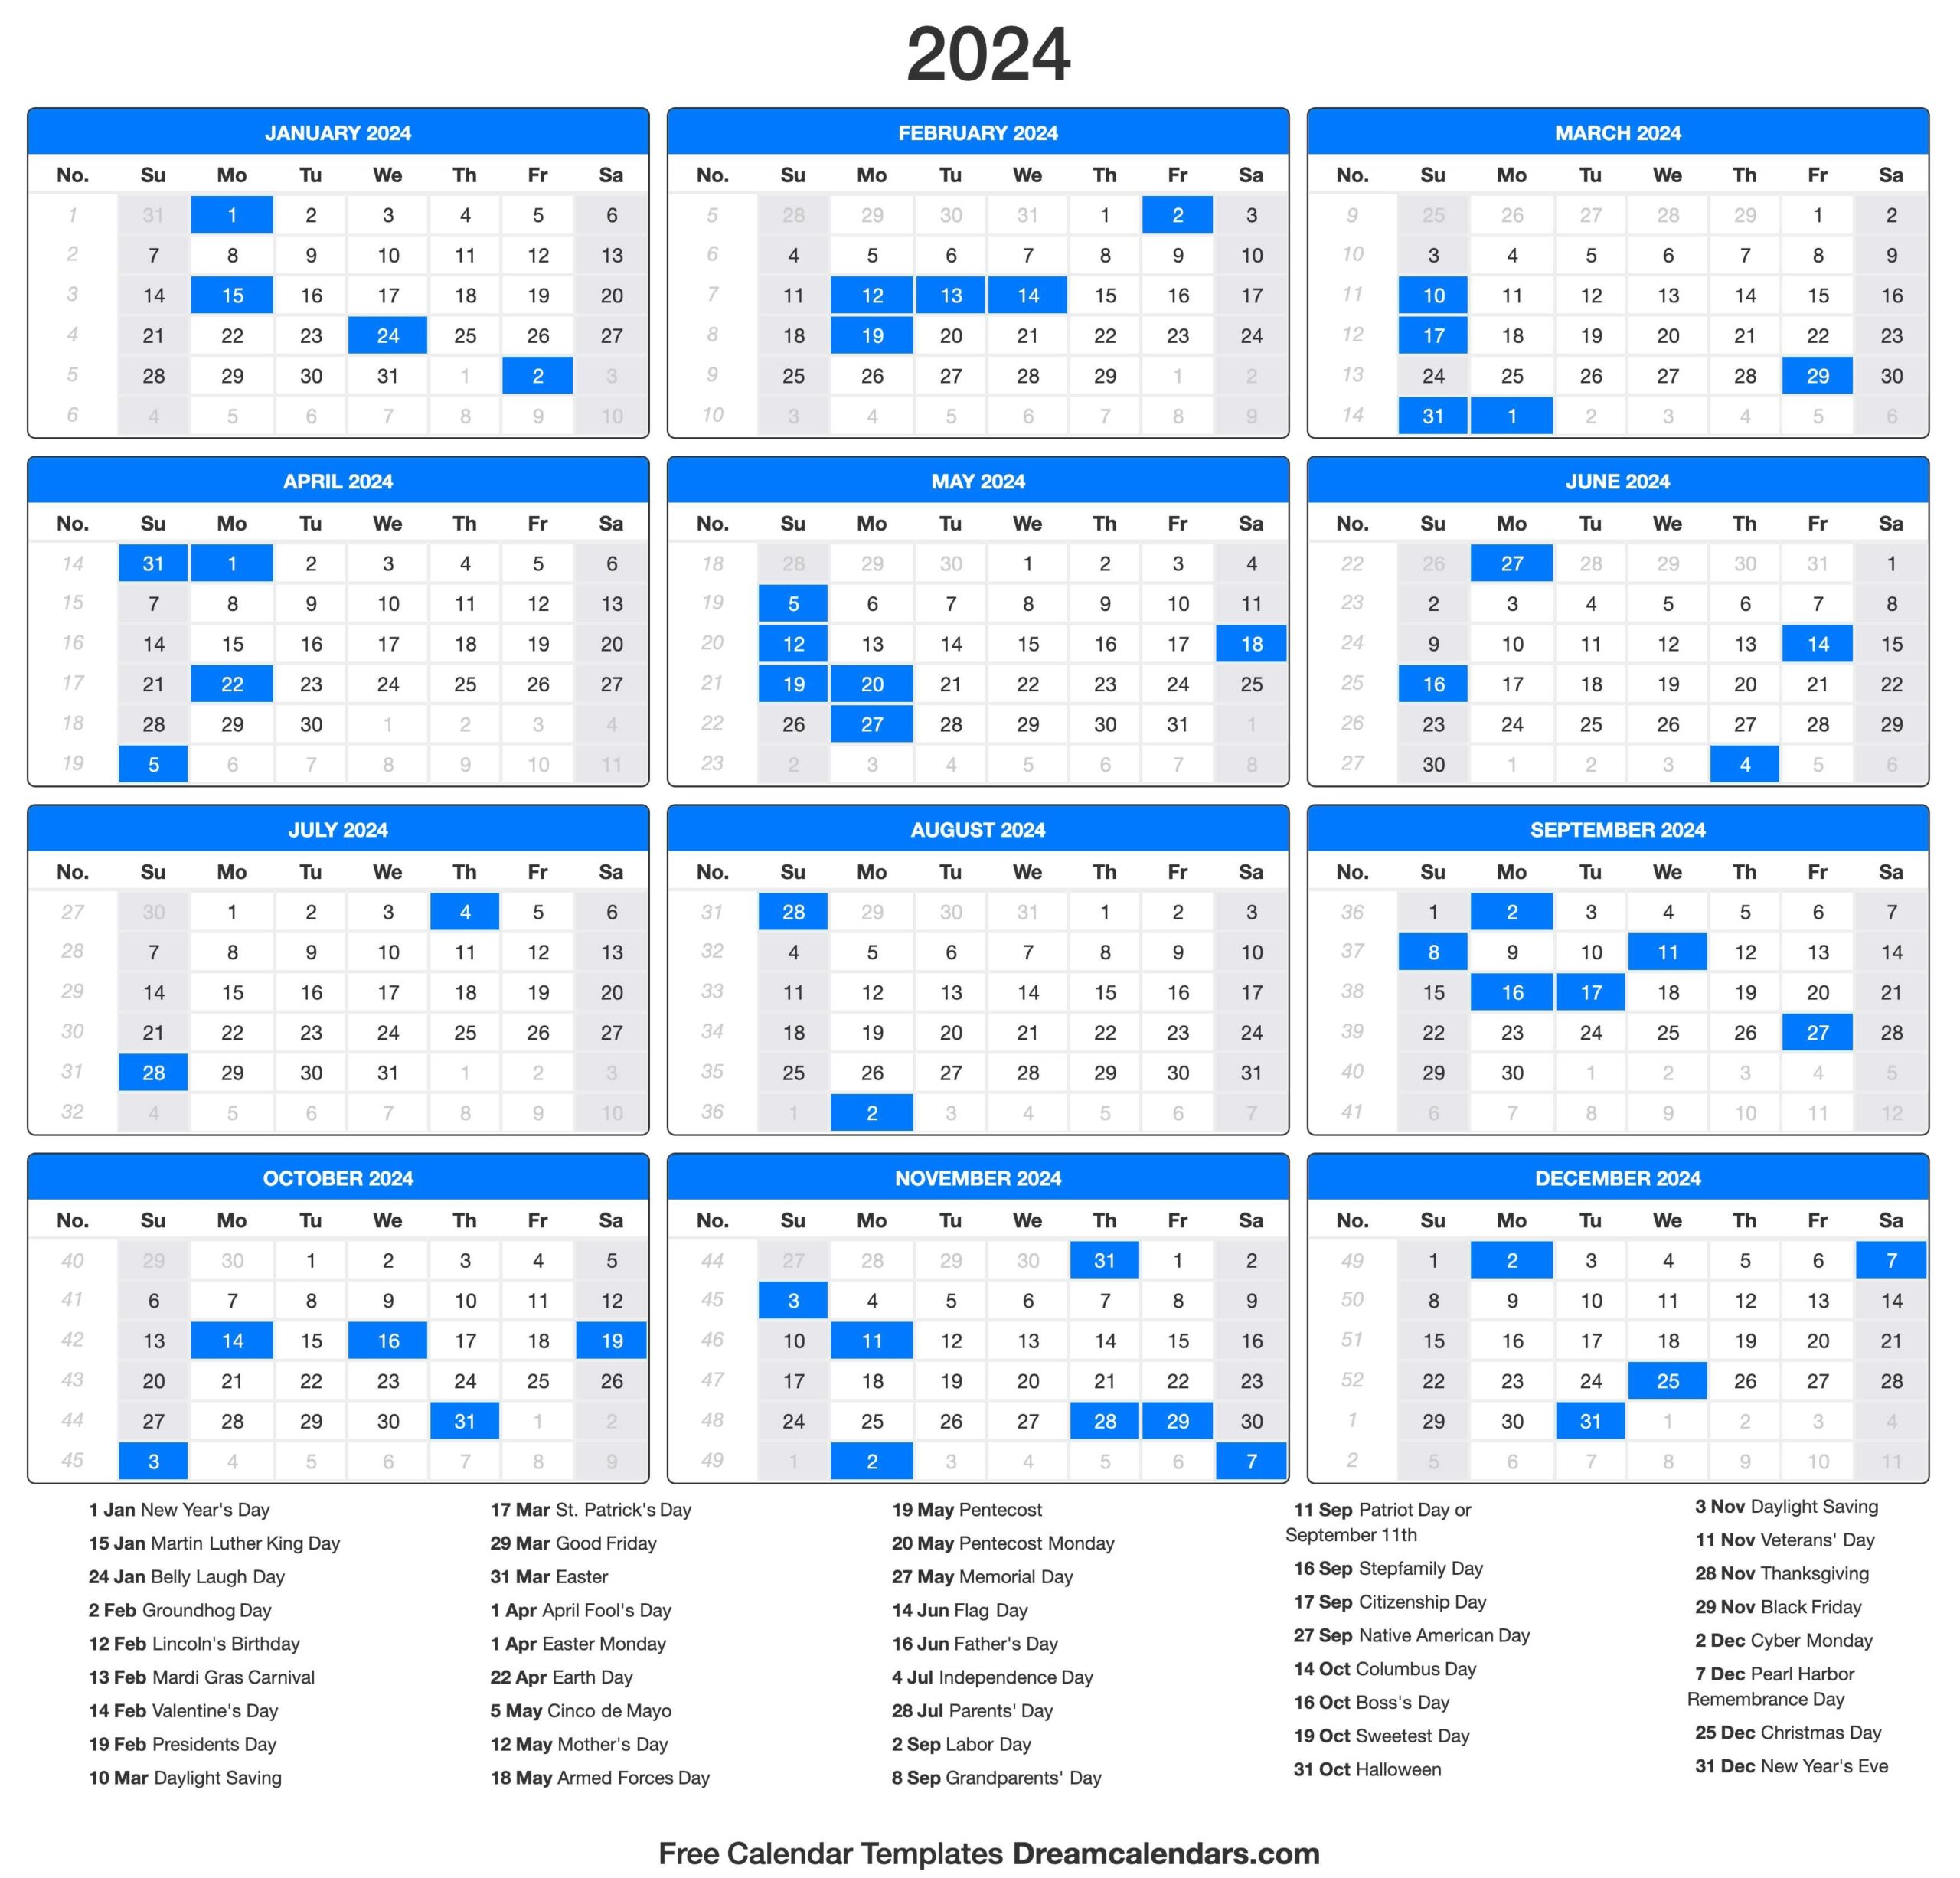 2024 Calendar - Free Printable 2024 Calendar With Holidays Without Downloading